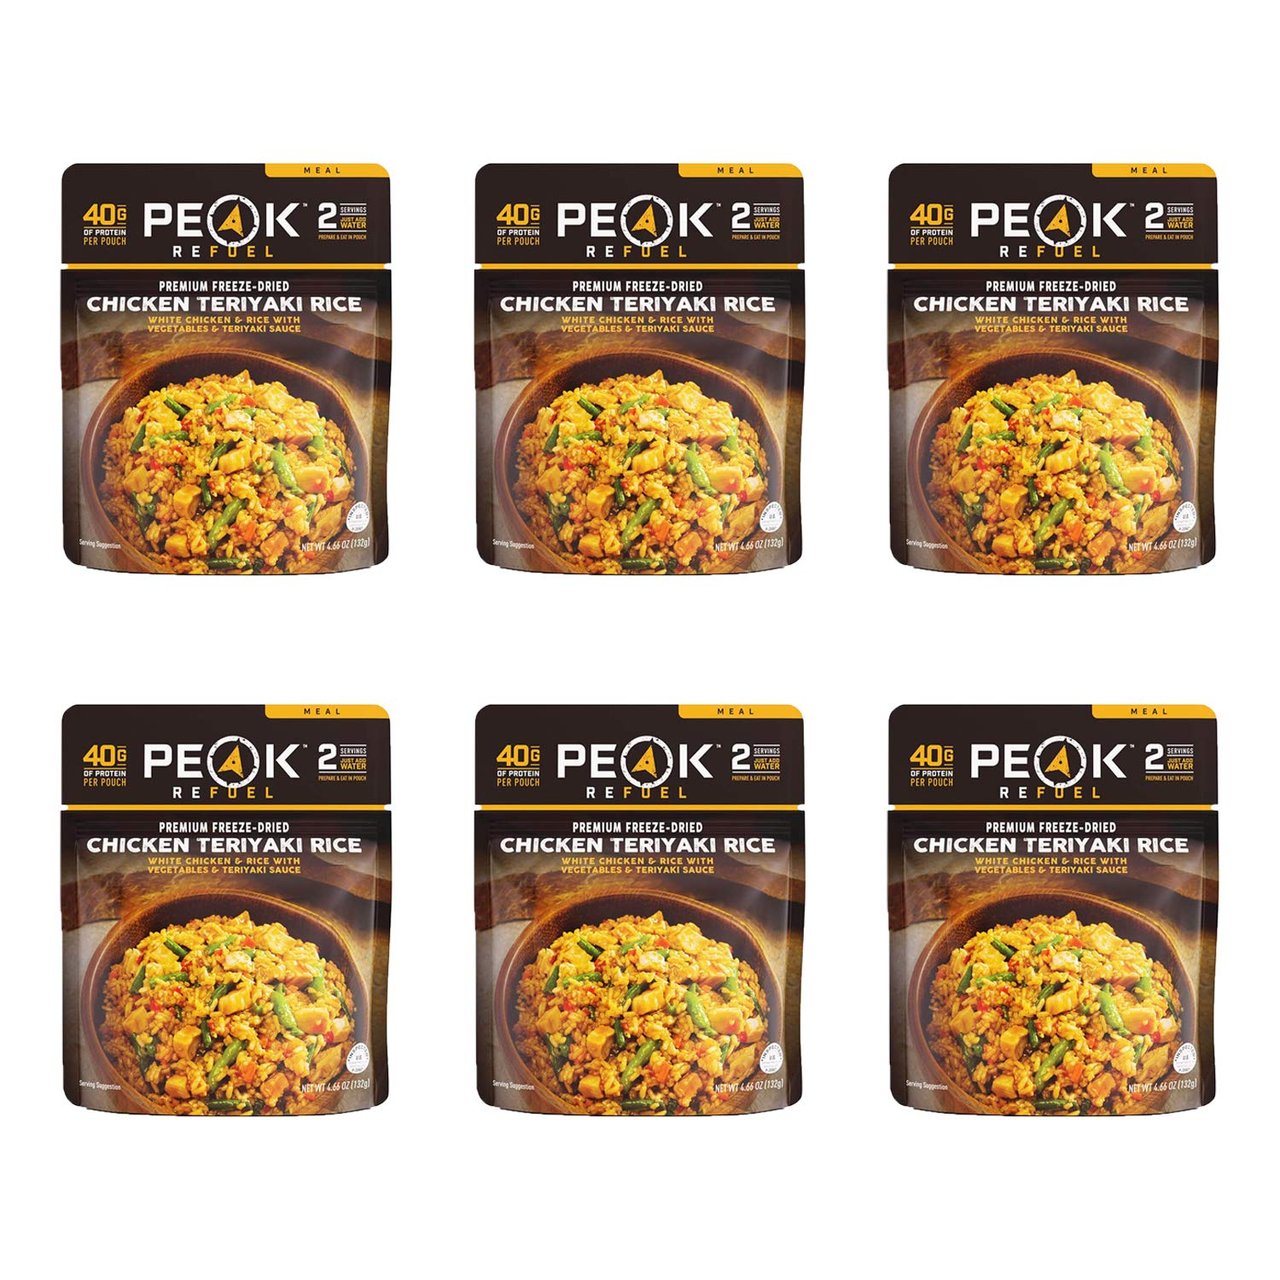 6 Freeze Dried Outdoor Meal with Exceptional Flavor, Rich Protein Content, Easy Preparation, and Featherlight Design